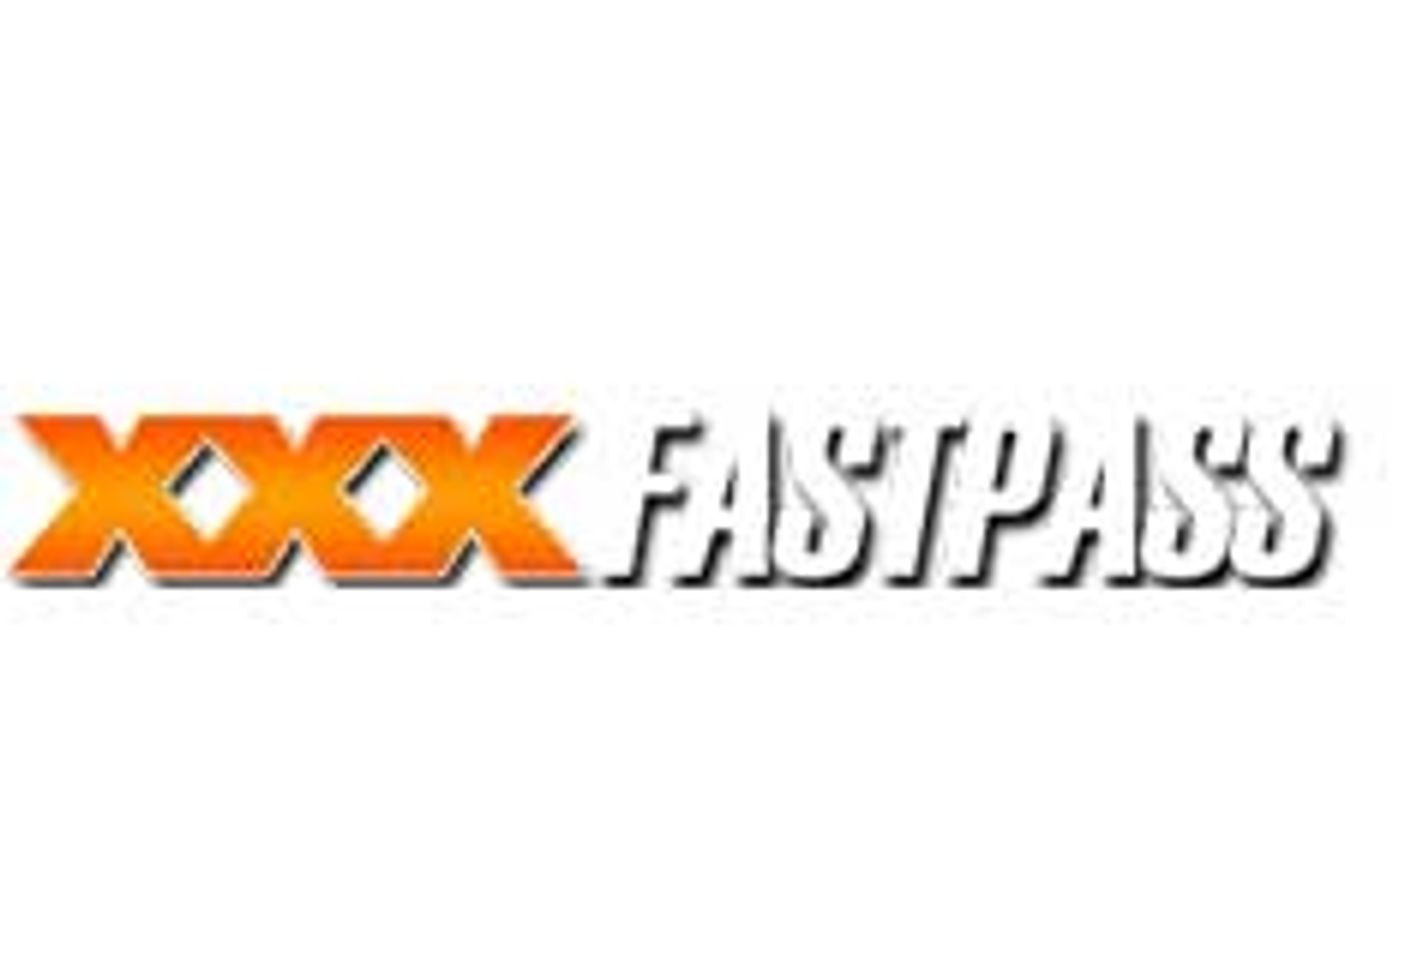 XxxFastPass Network Sites Nominated for AVN Awards; Companys Web Stars to Sign at AEE